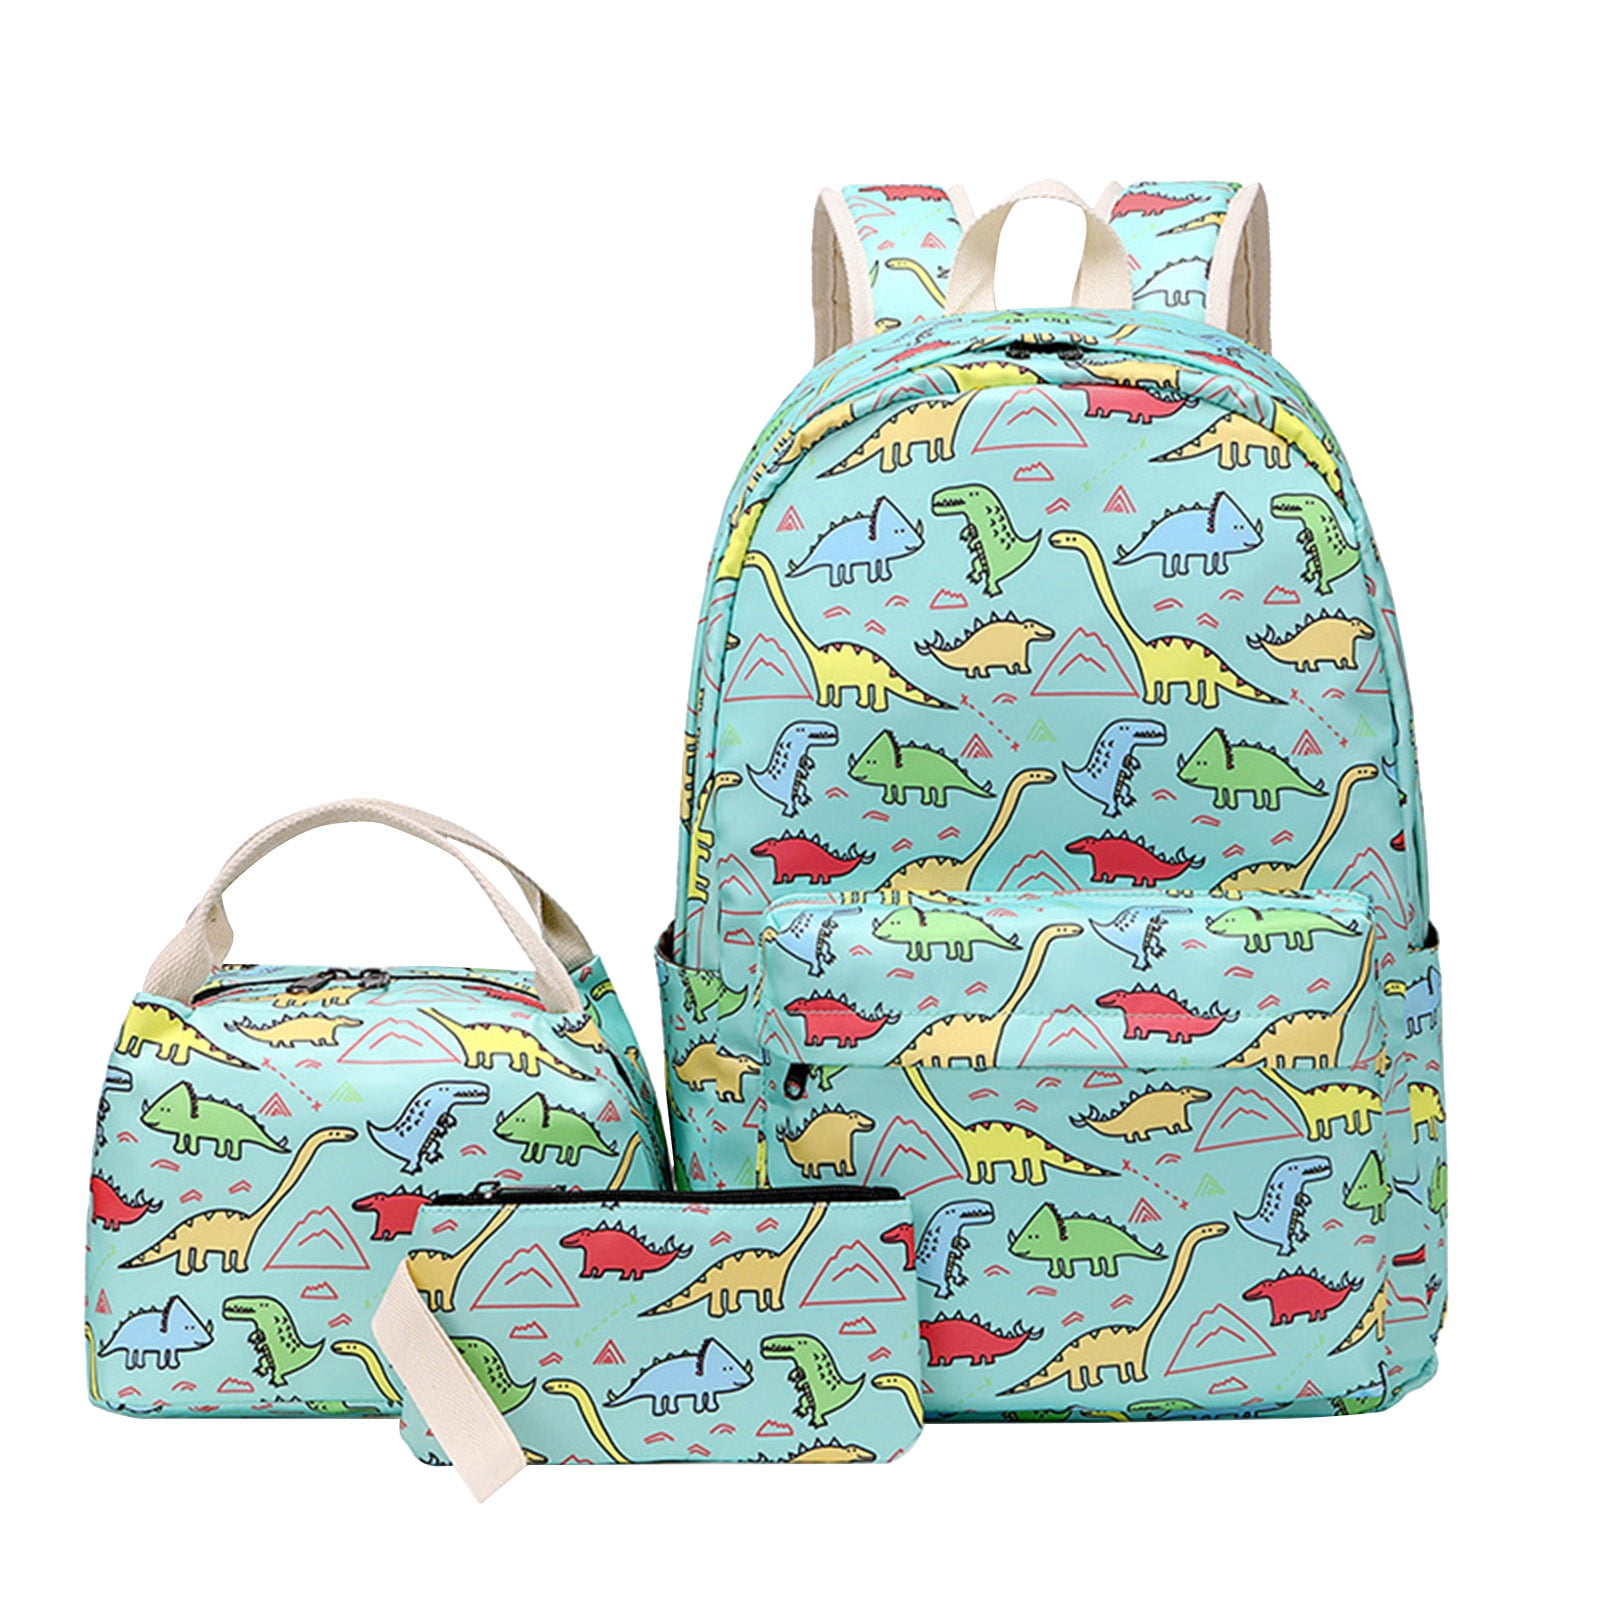 Cool Kids Dino Backpack For Fun School Time - Inspire Uplift